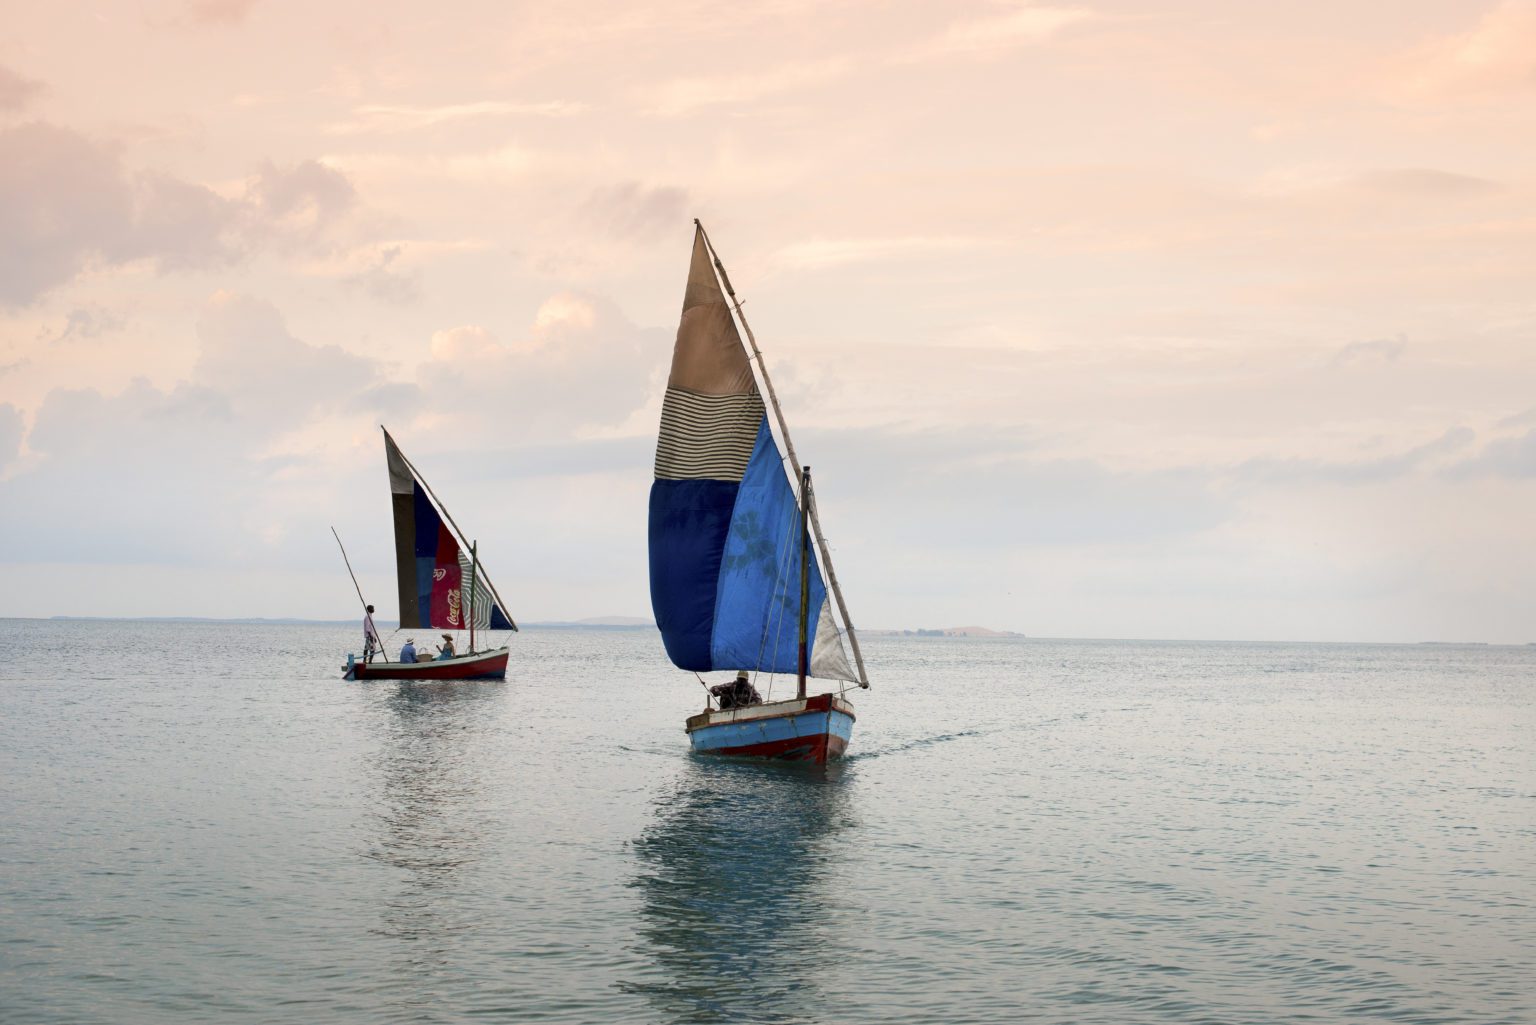 Mozambique dhows on water at sunset